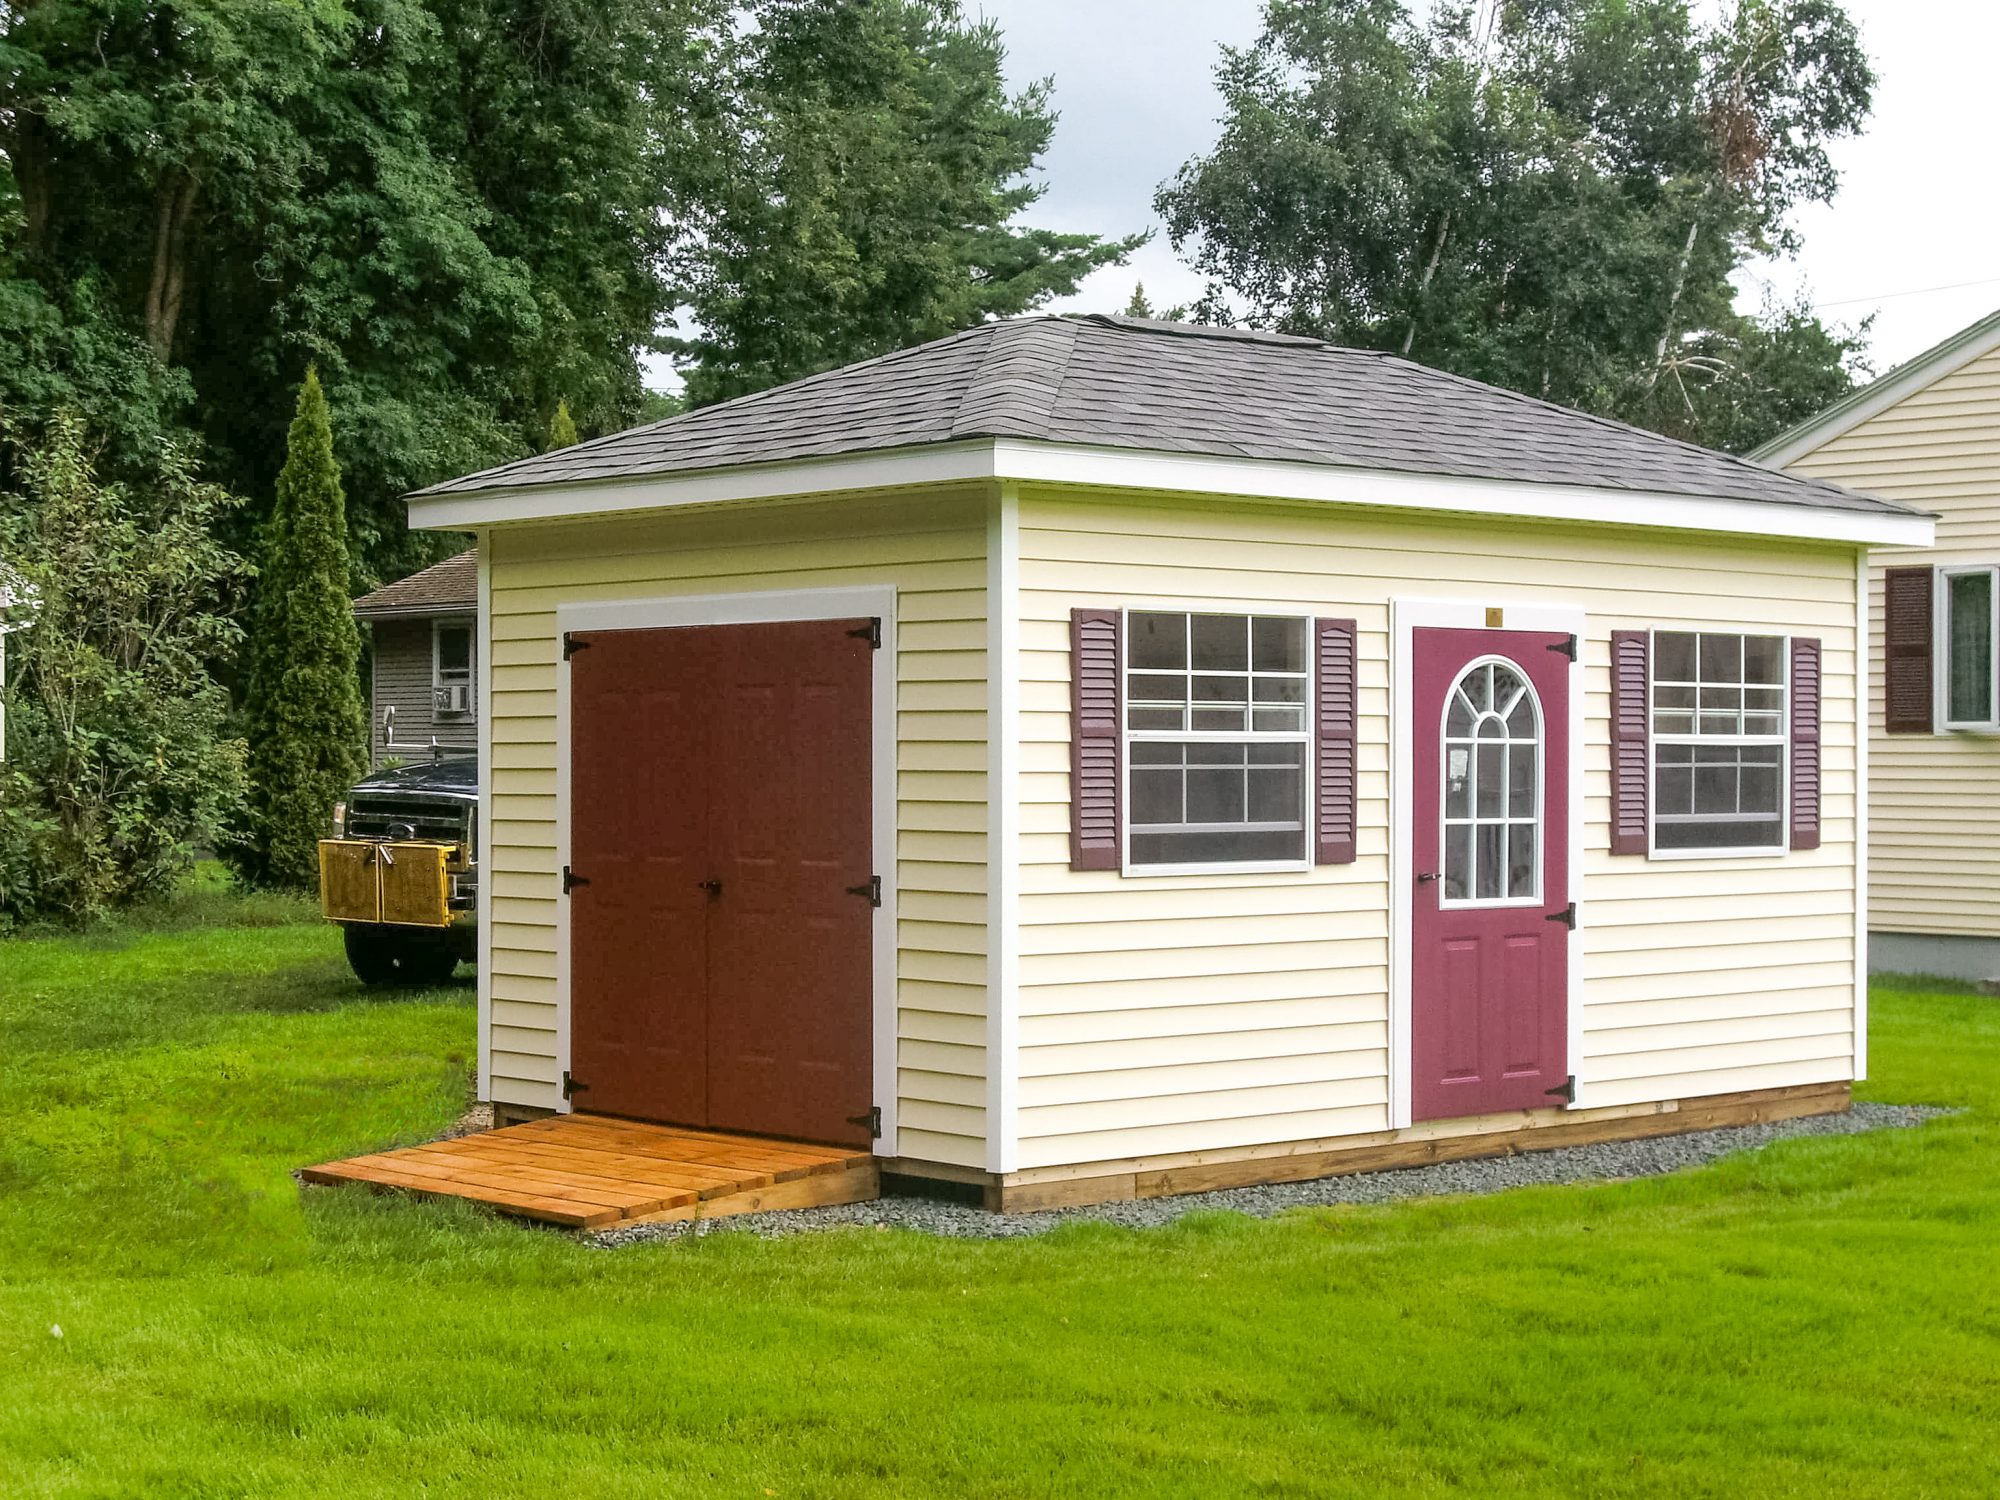 Hip Roof Shed Designs | Quality Storage Sheds For Sale